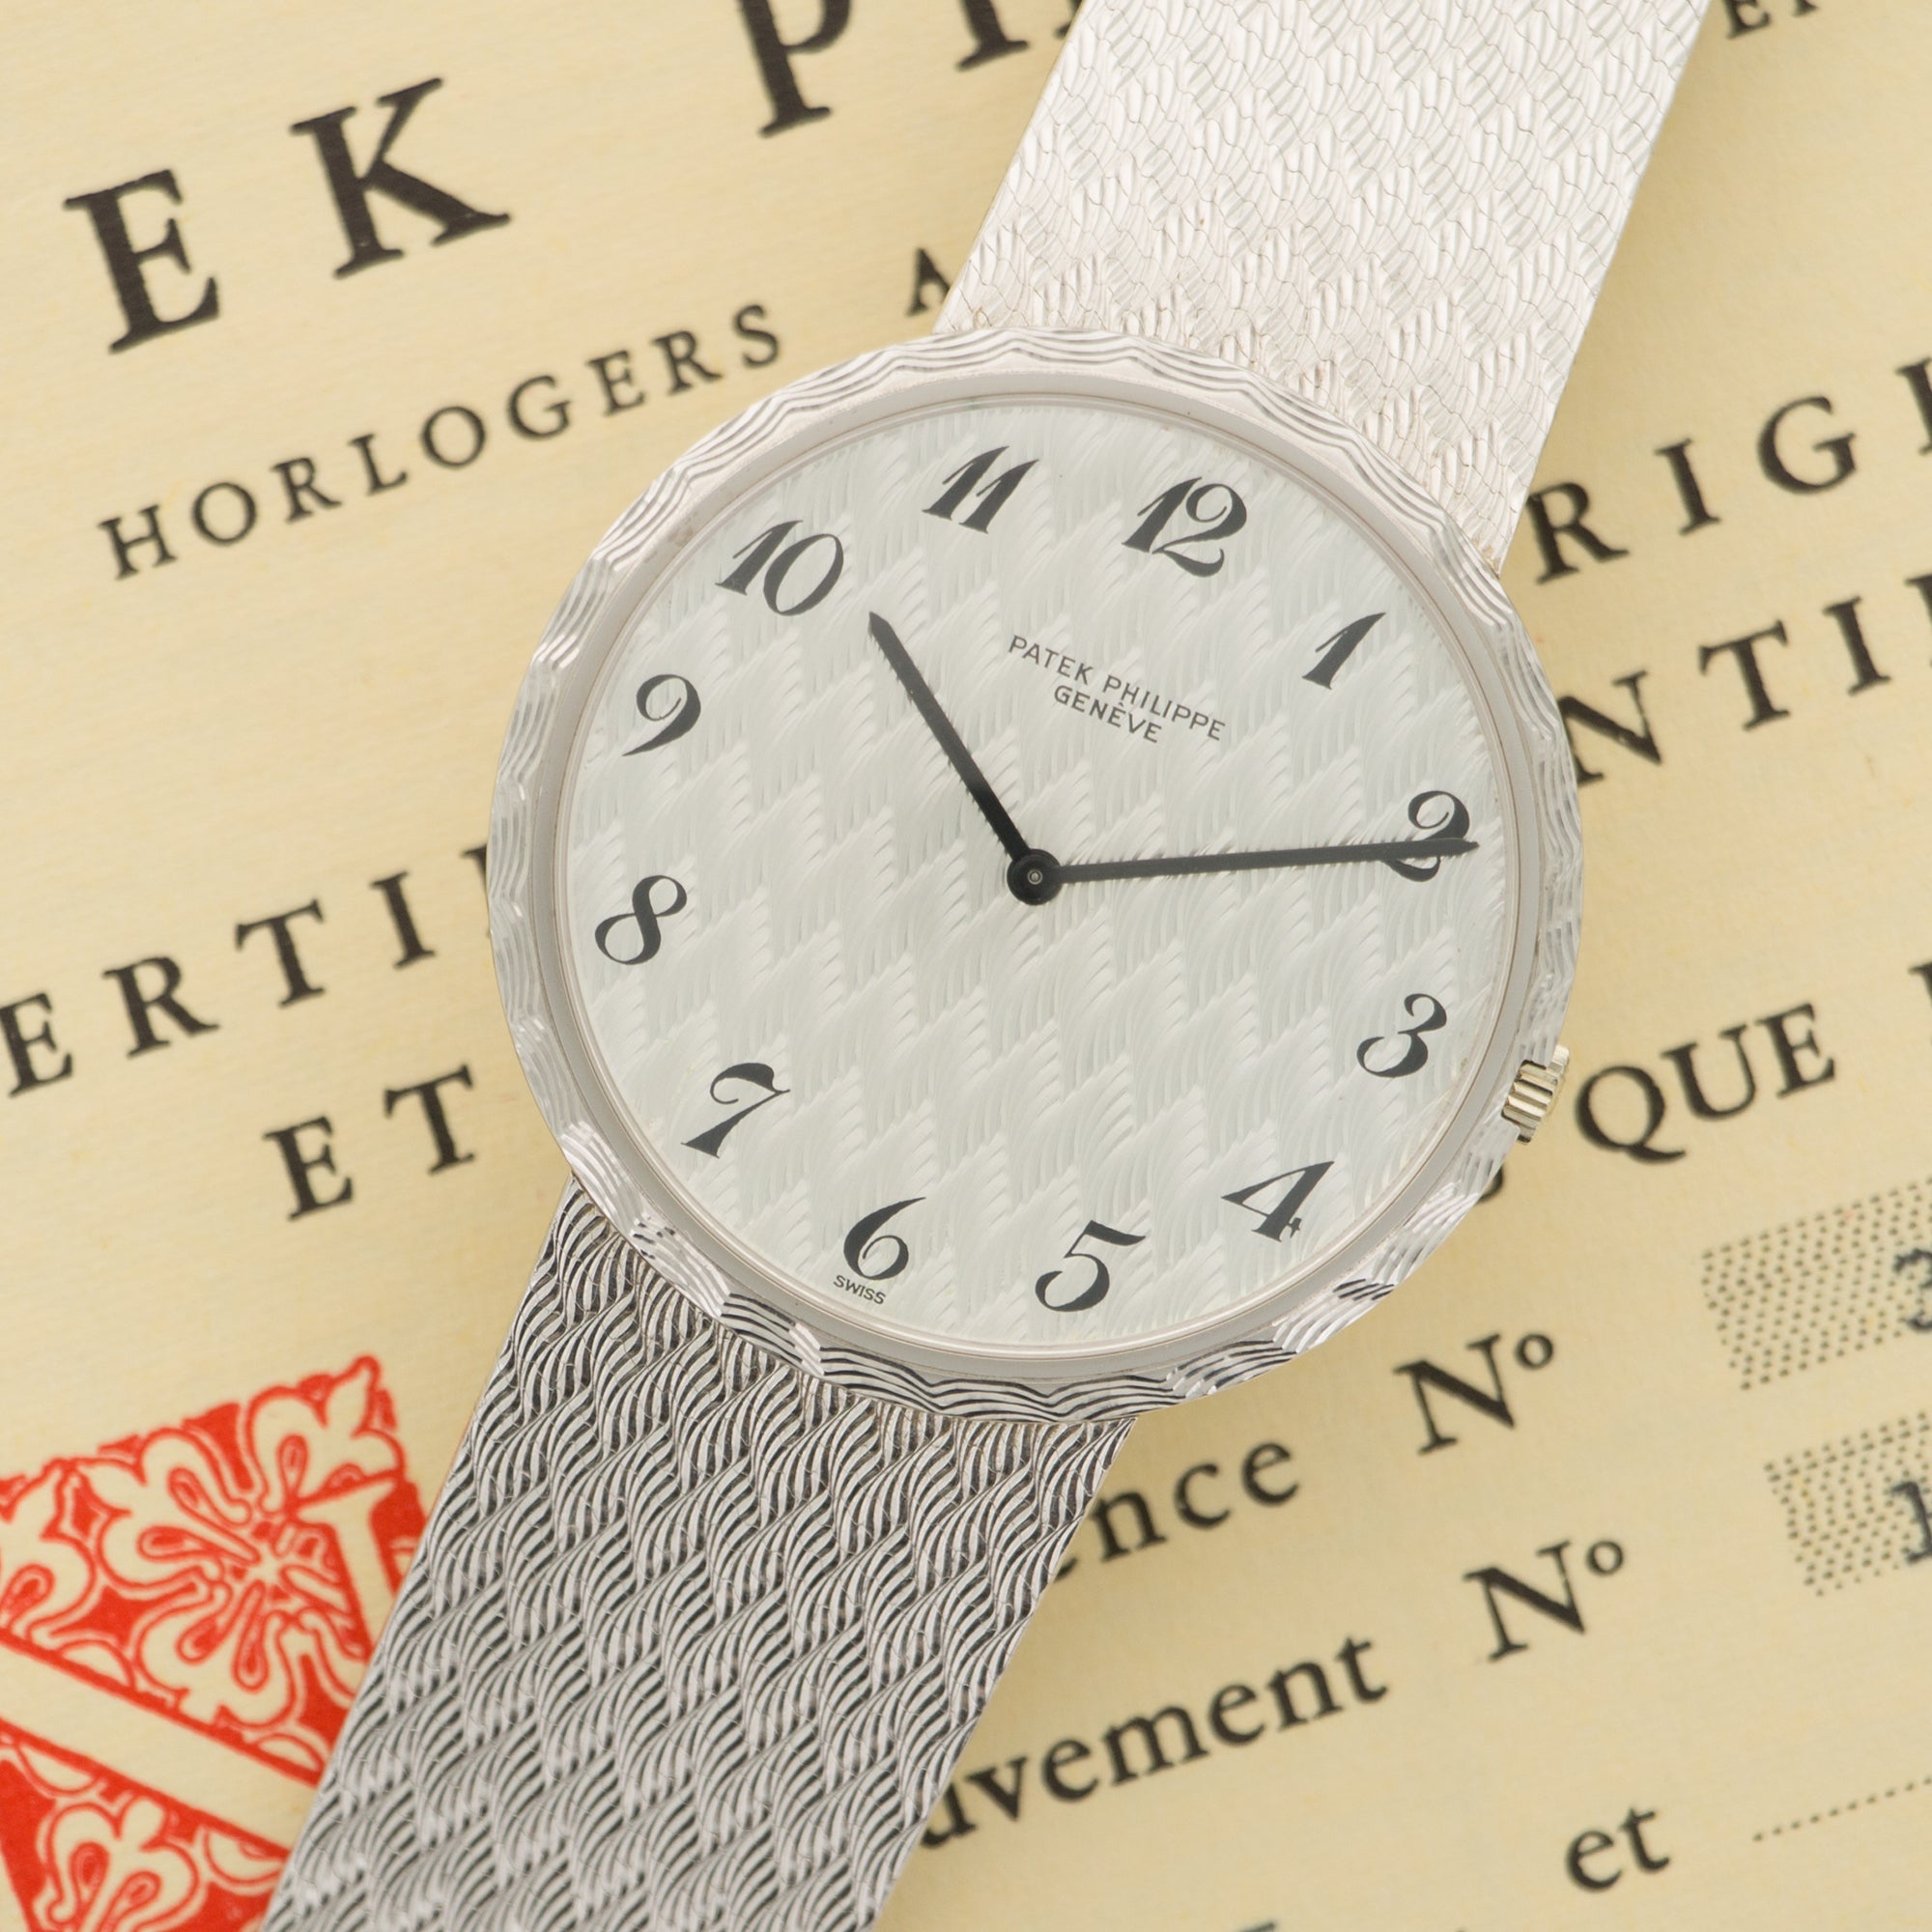 Patek Philippe - Patek Philippe White Gold Automatic Watch Ref. 3588/1 with Certificate - The Keystone Watches